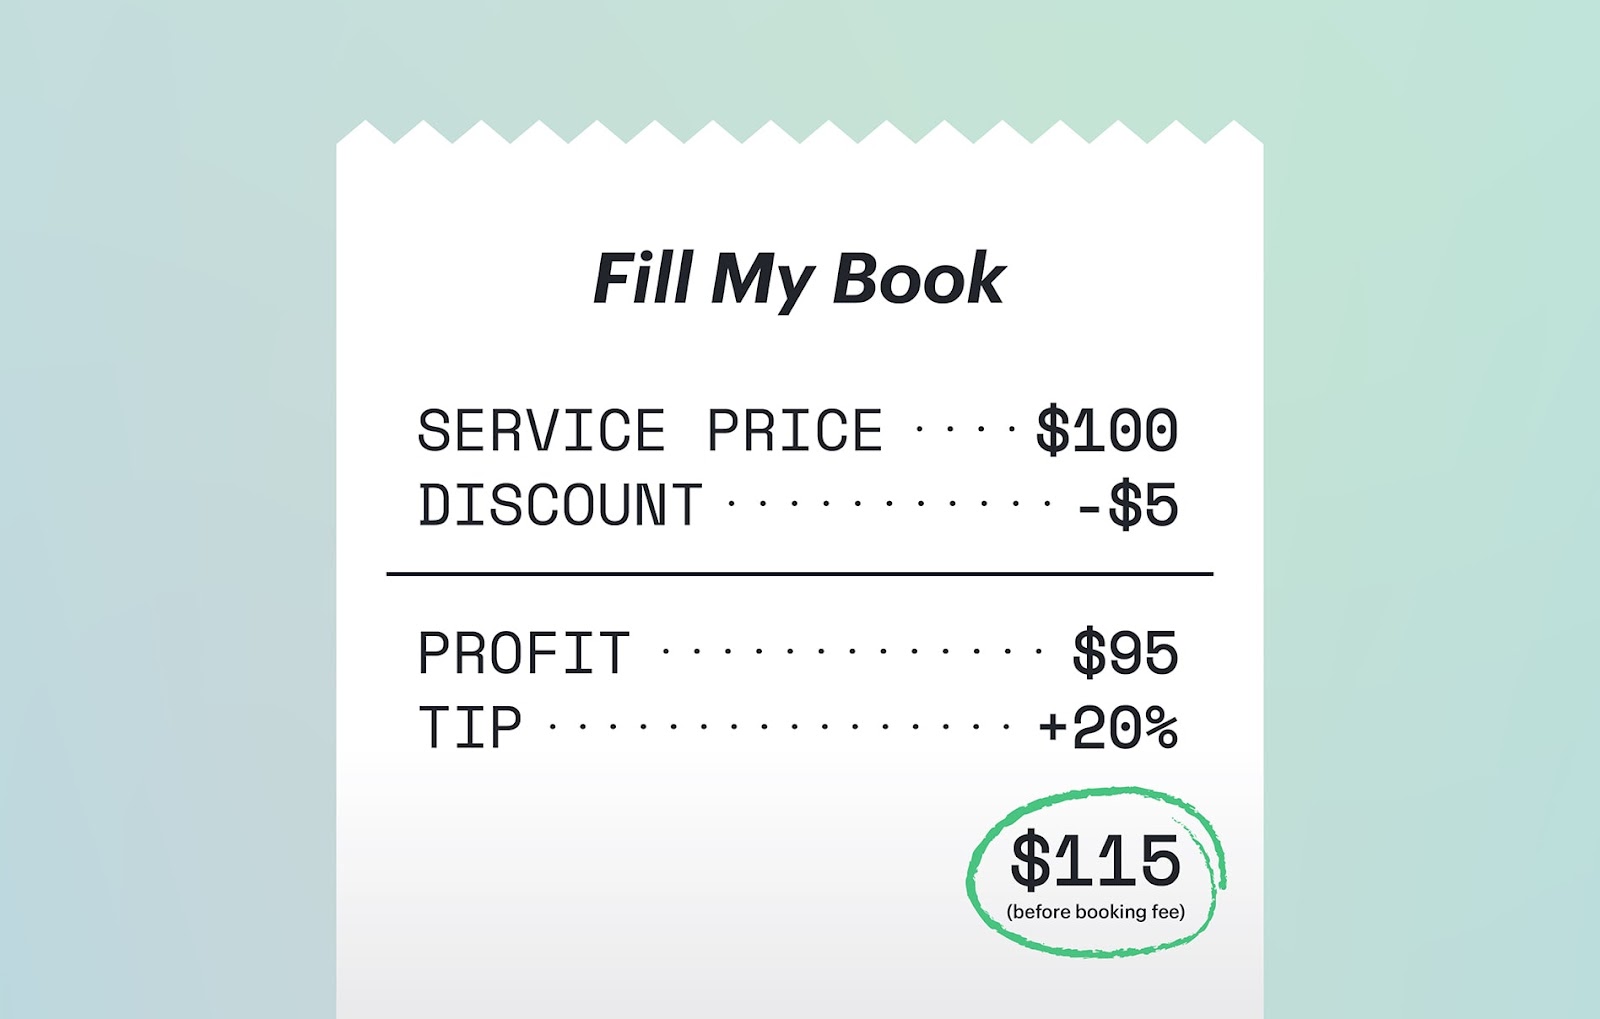 Image of a mock receipt showing earnings with a Fill My Book booking.
